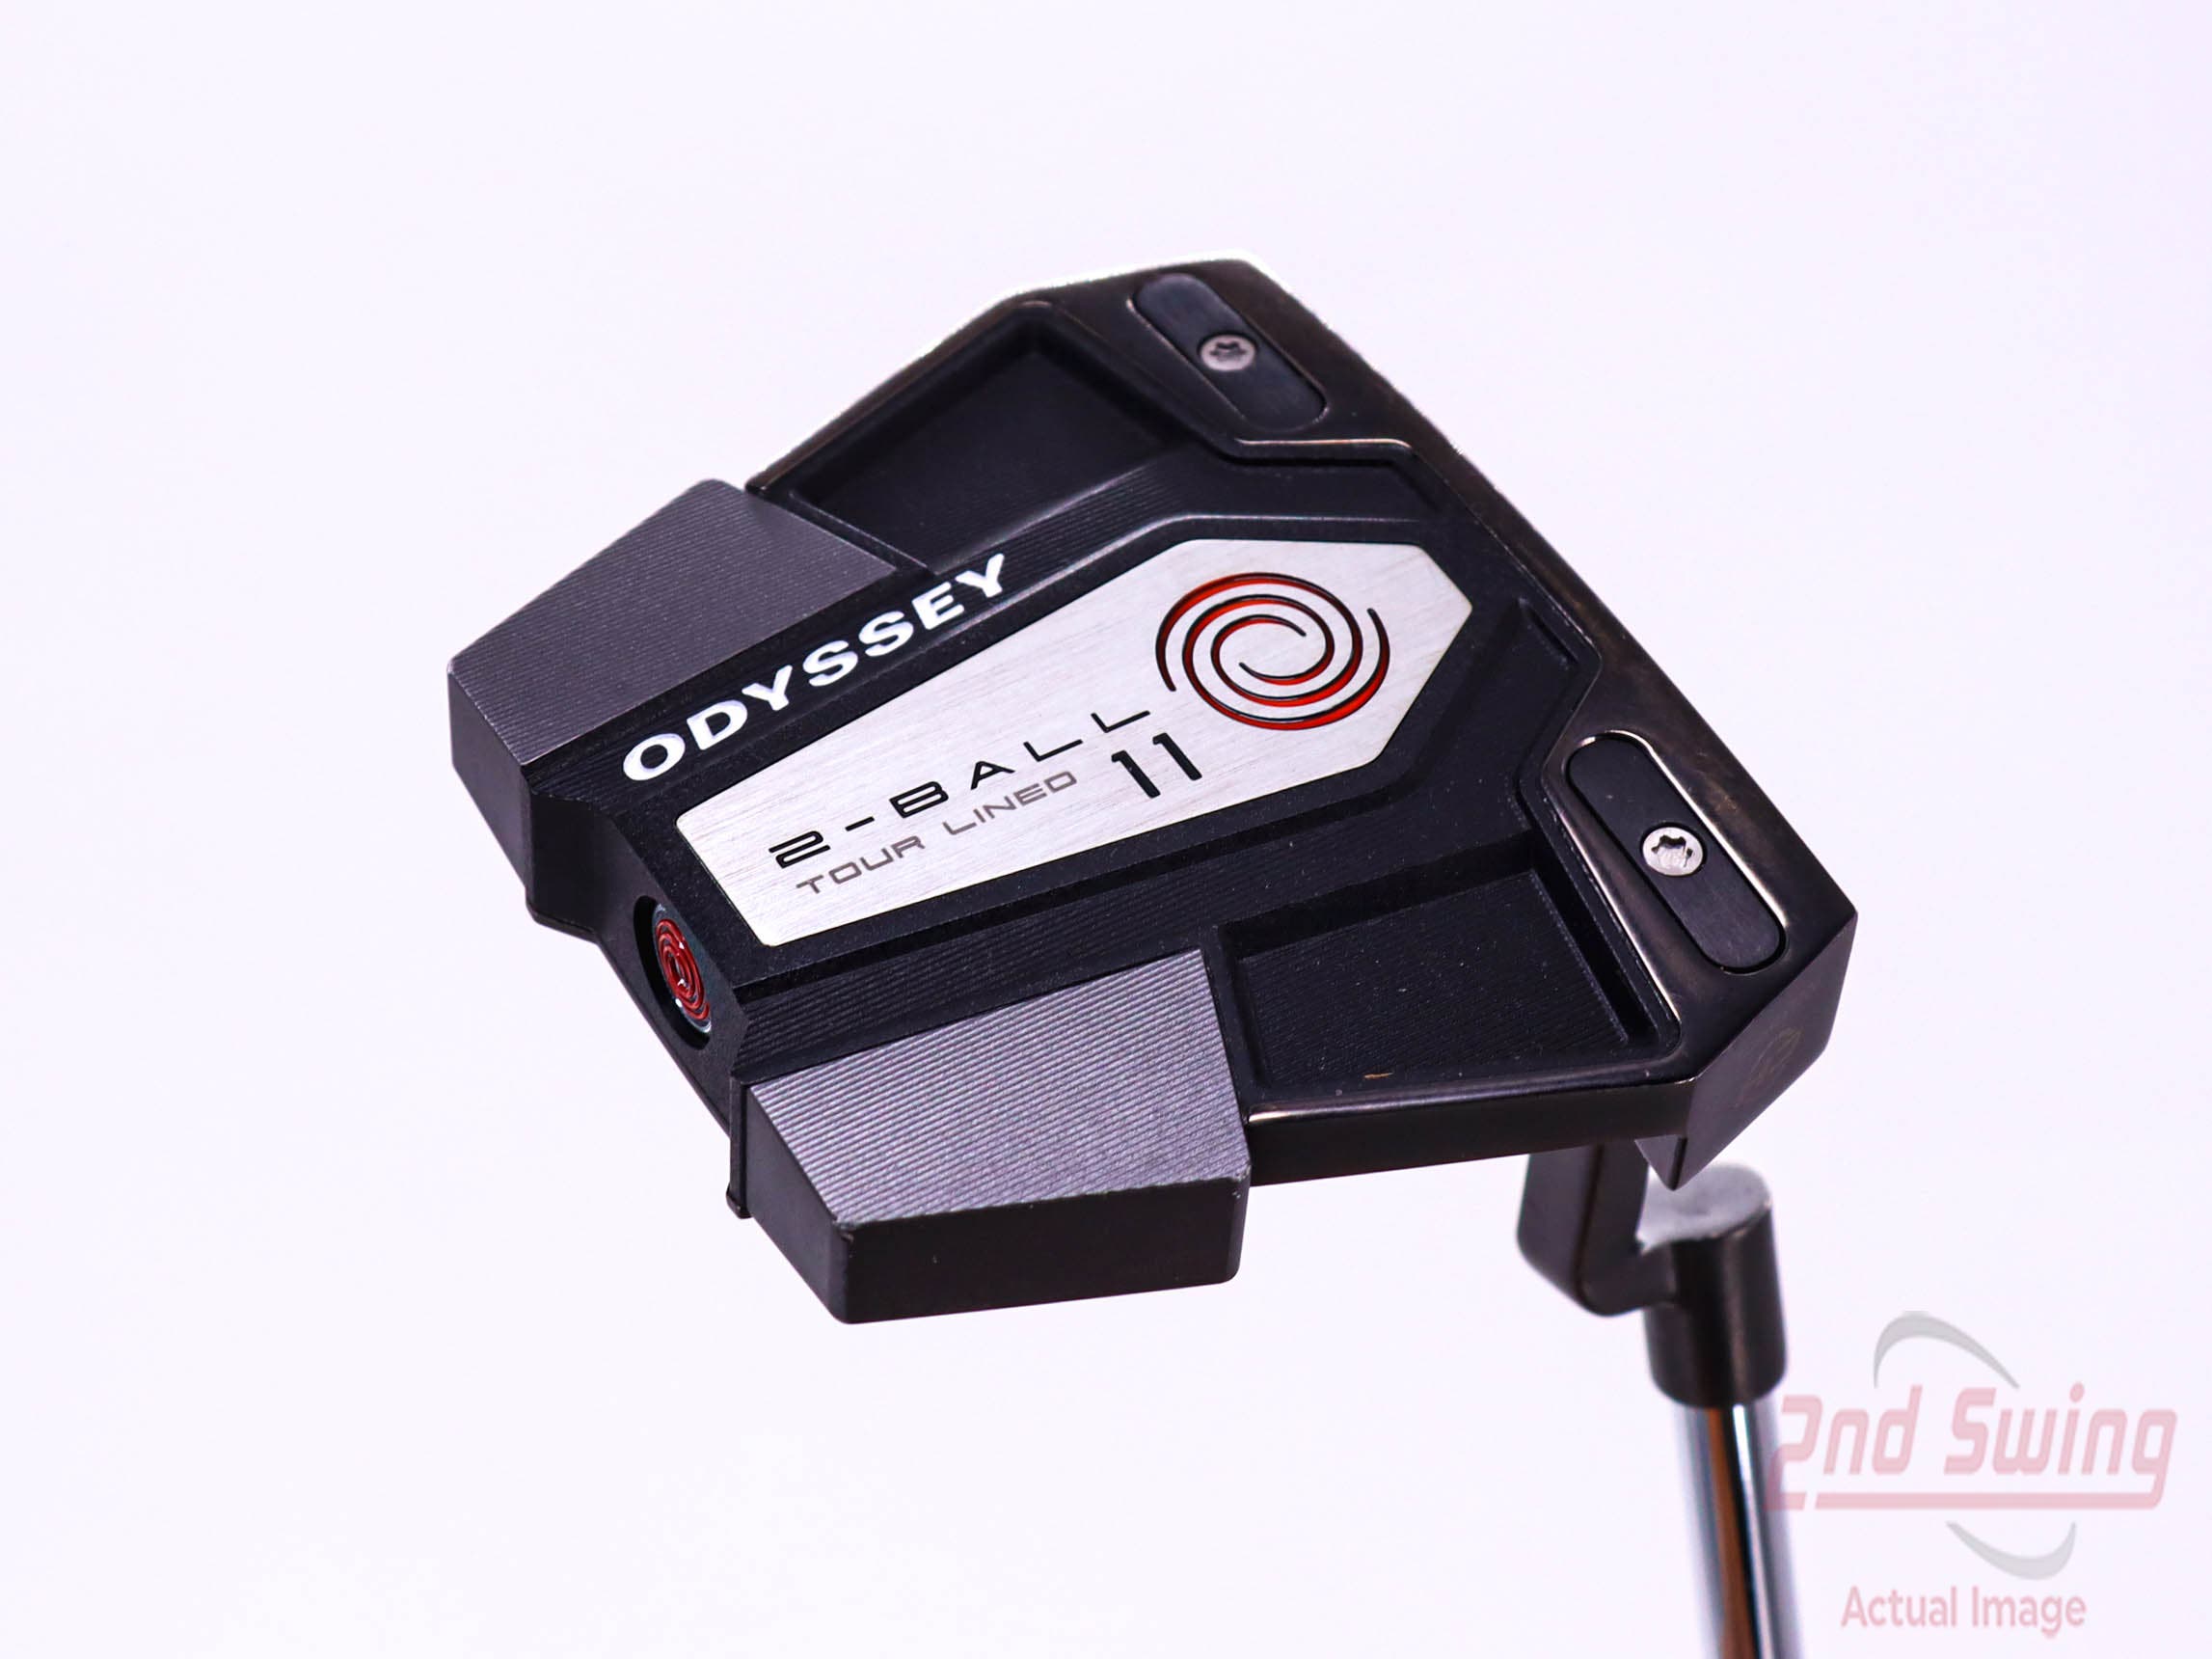 Odyssey 2-Ball Eleven Tour Lined CH Putter (D-82332912418)